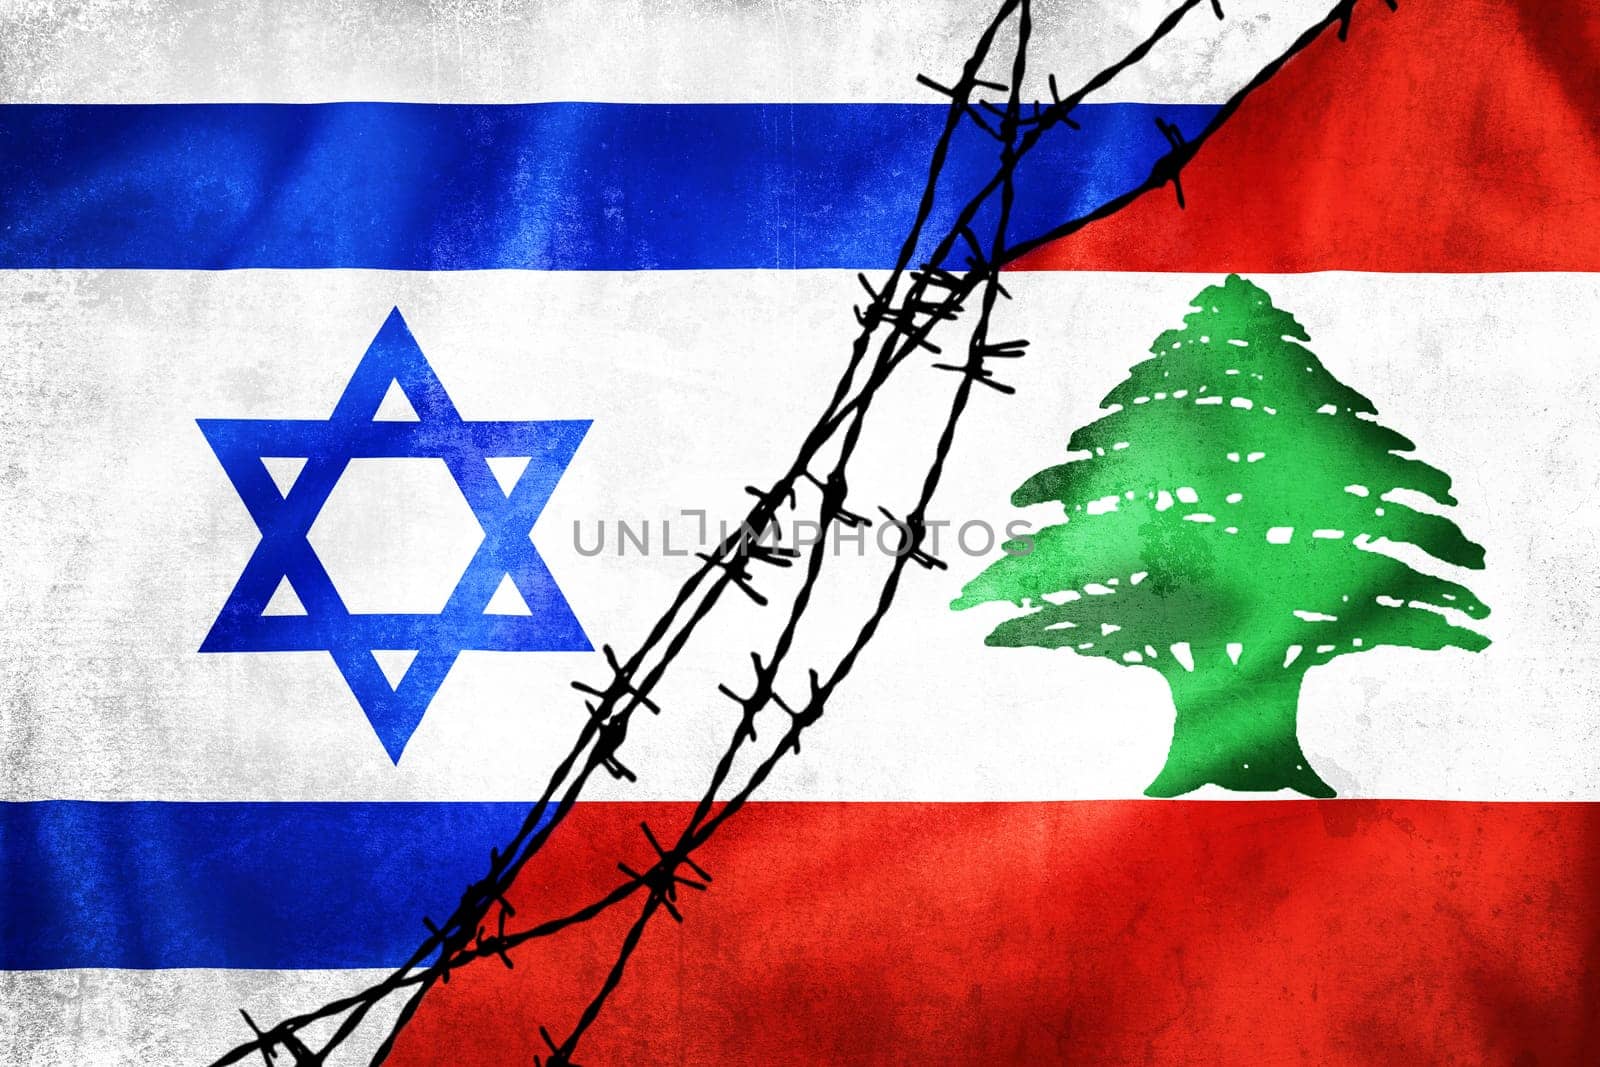 Grunge flags of Israel and Lebanon divided by barb wire illustration by xbrchx